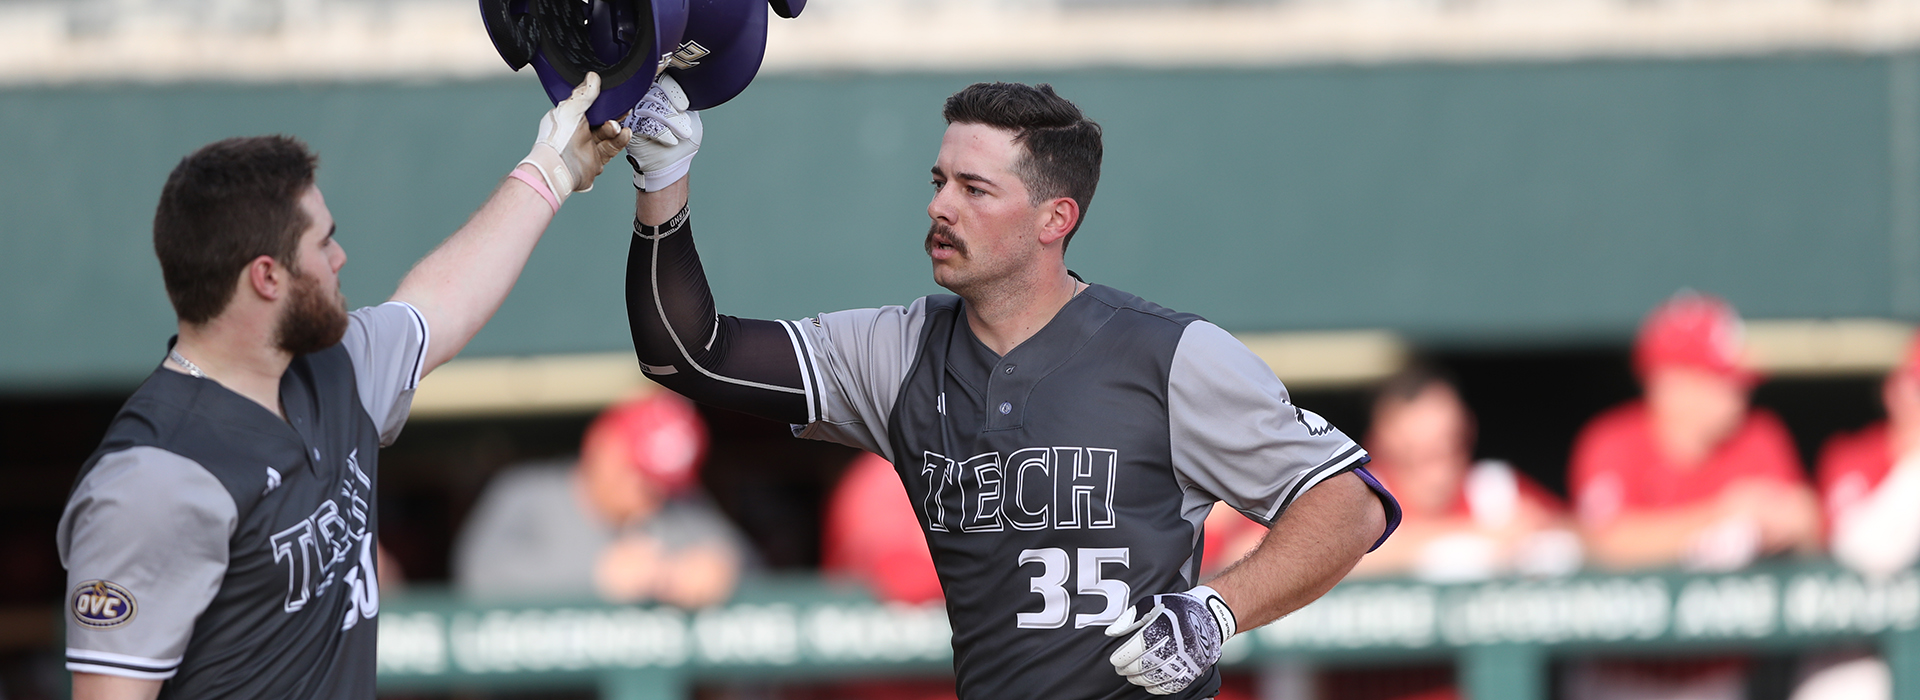 Patience pays off as Tech outlasts Morehead State in 10 innings to open OVC play